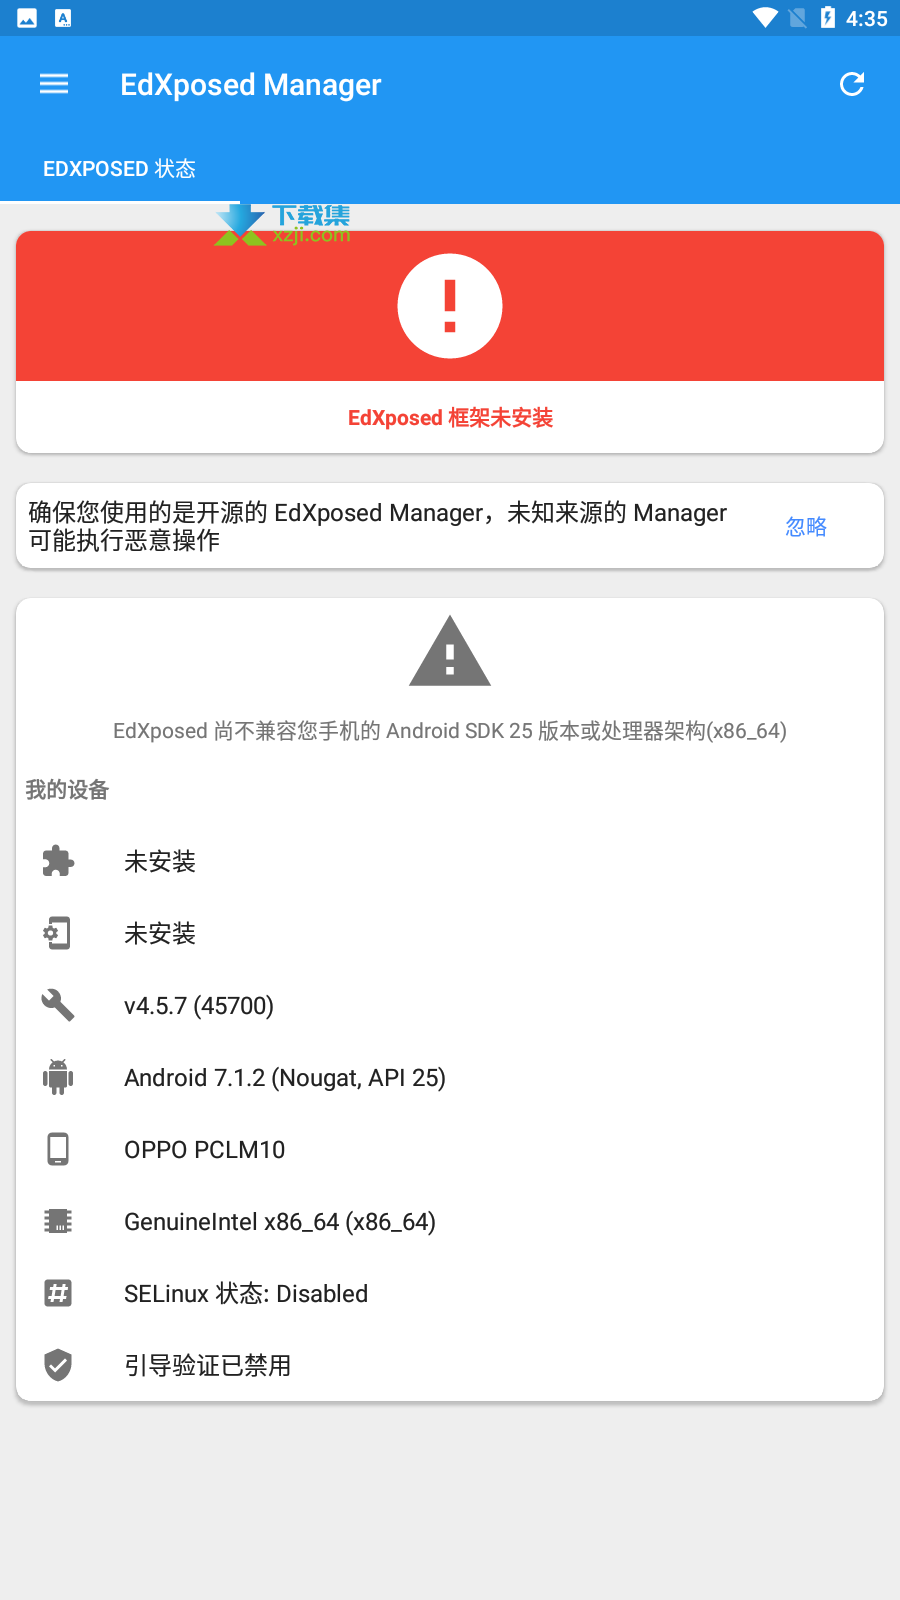 EdXposed Manager界面